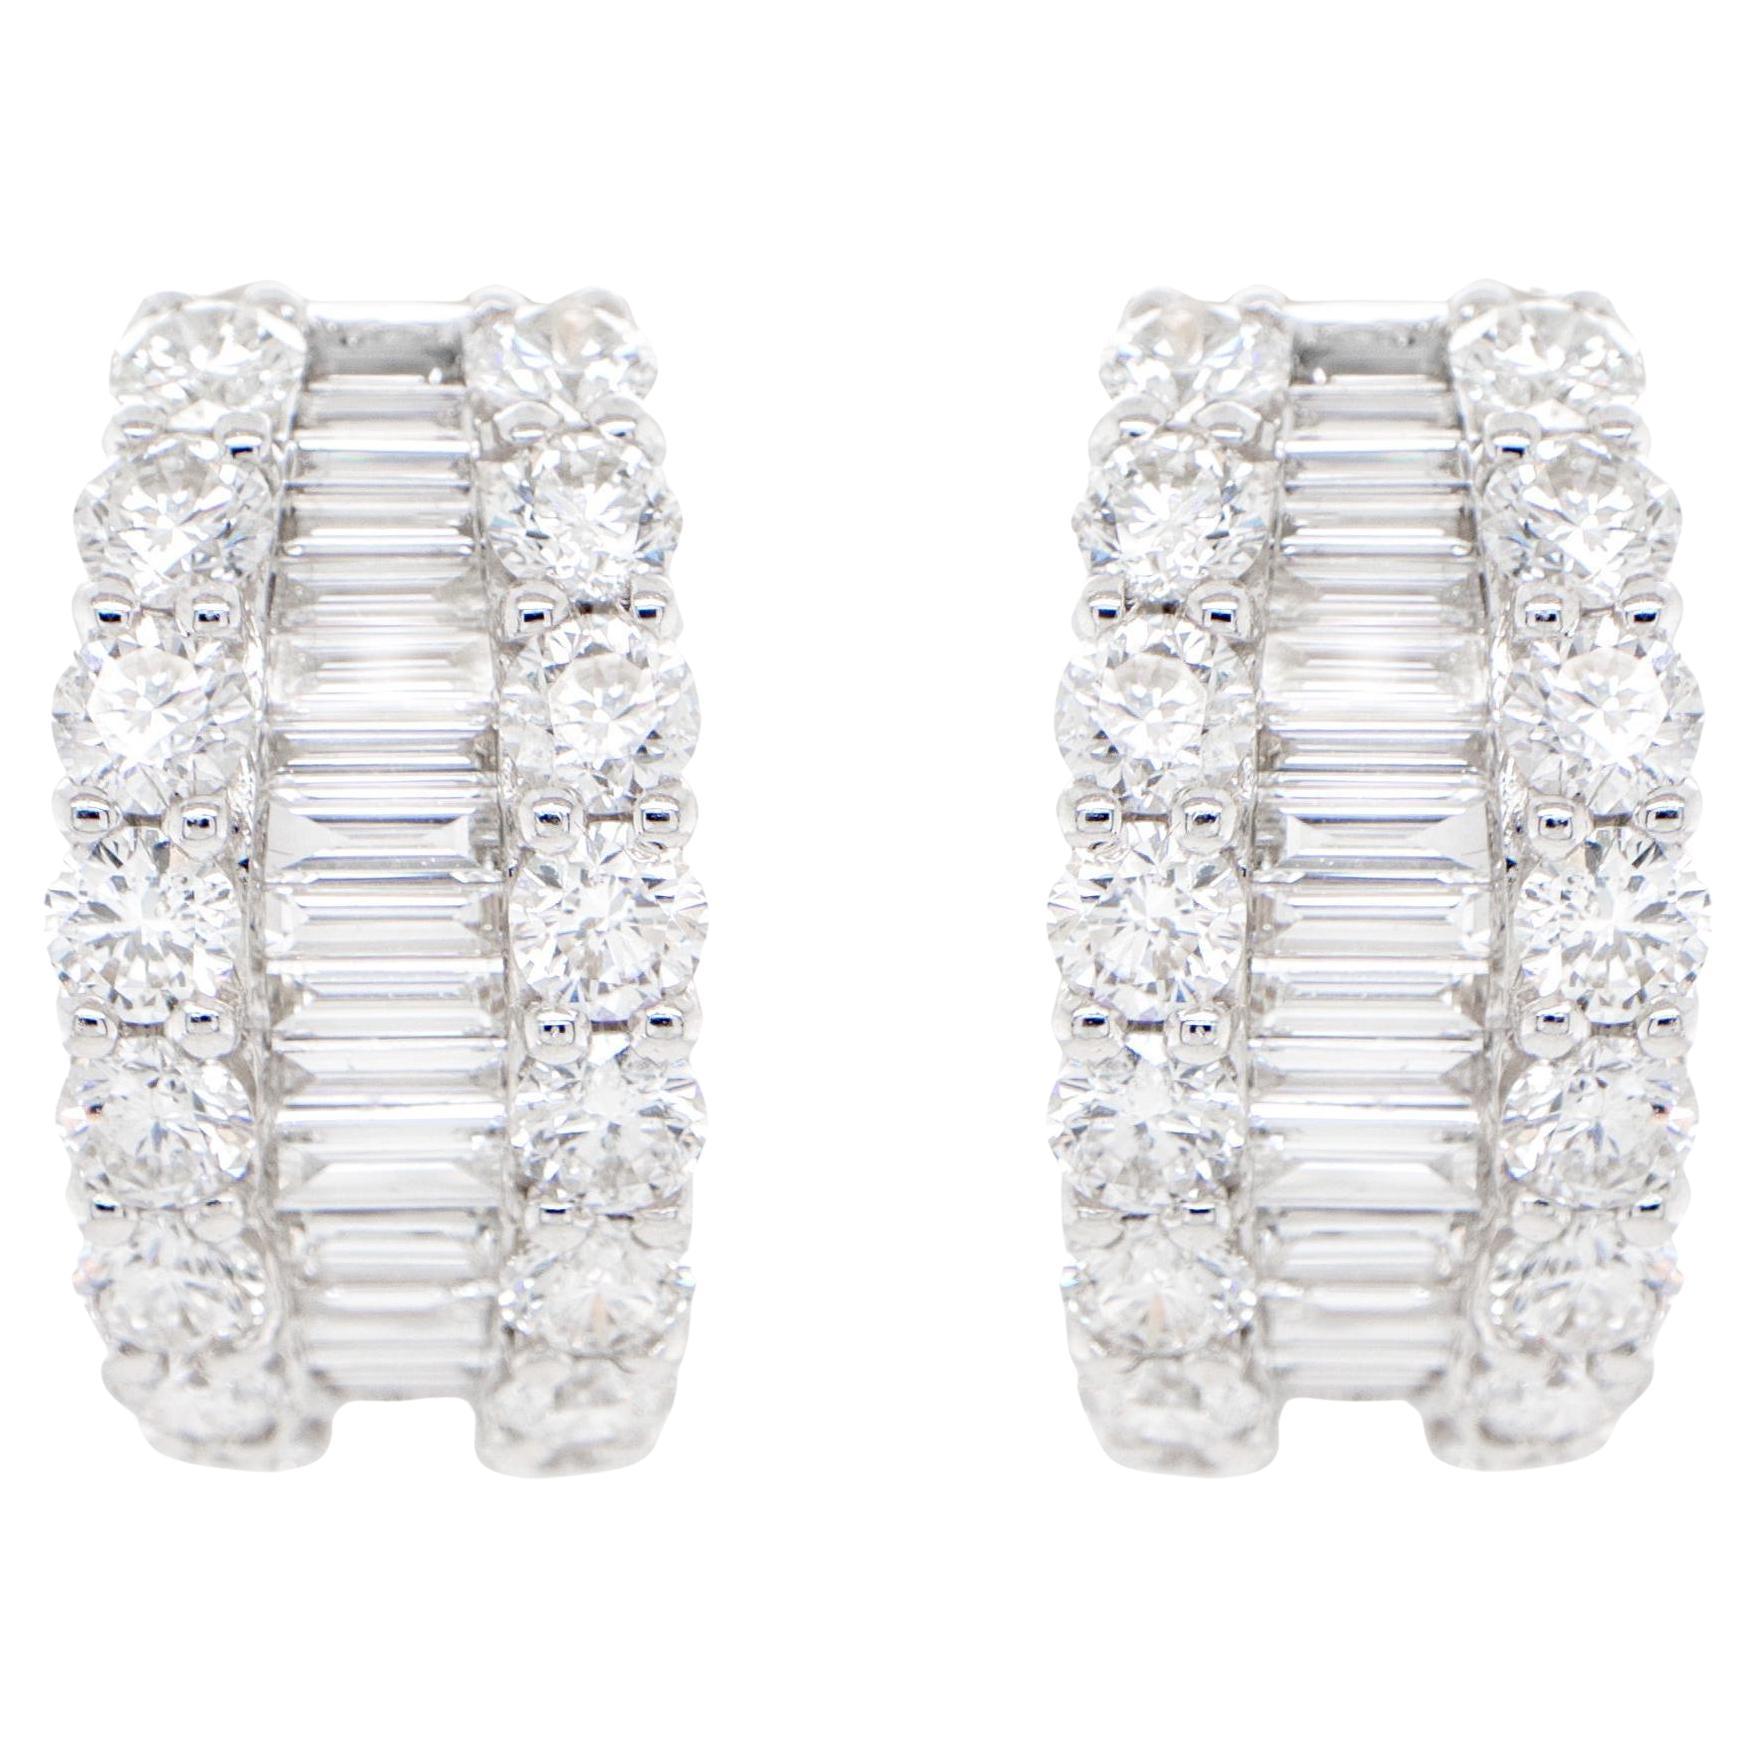 Diamond Earrings Baguette and Round 5.6 Carats 18K Gold